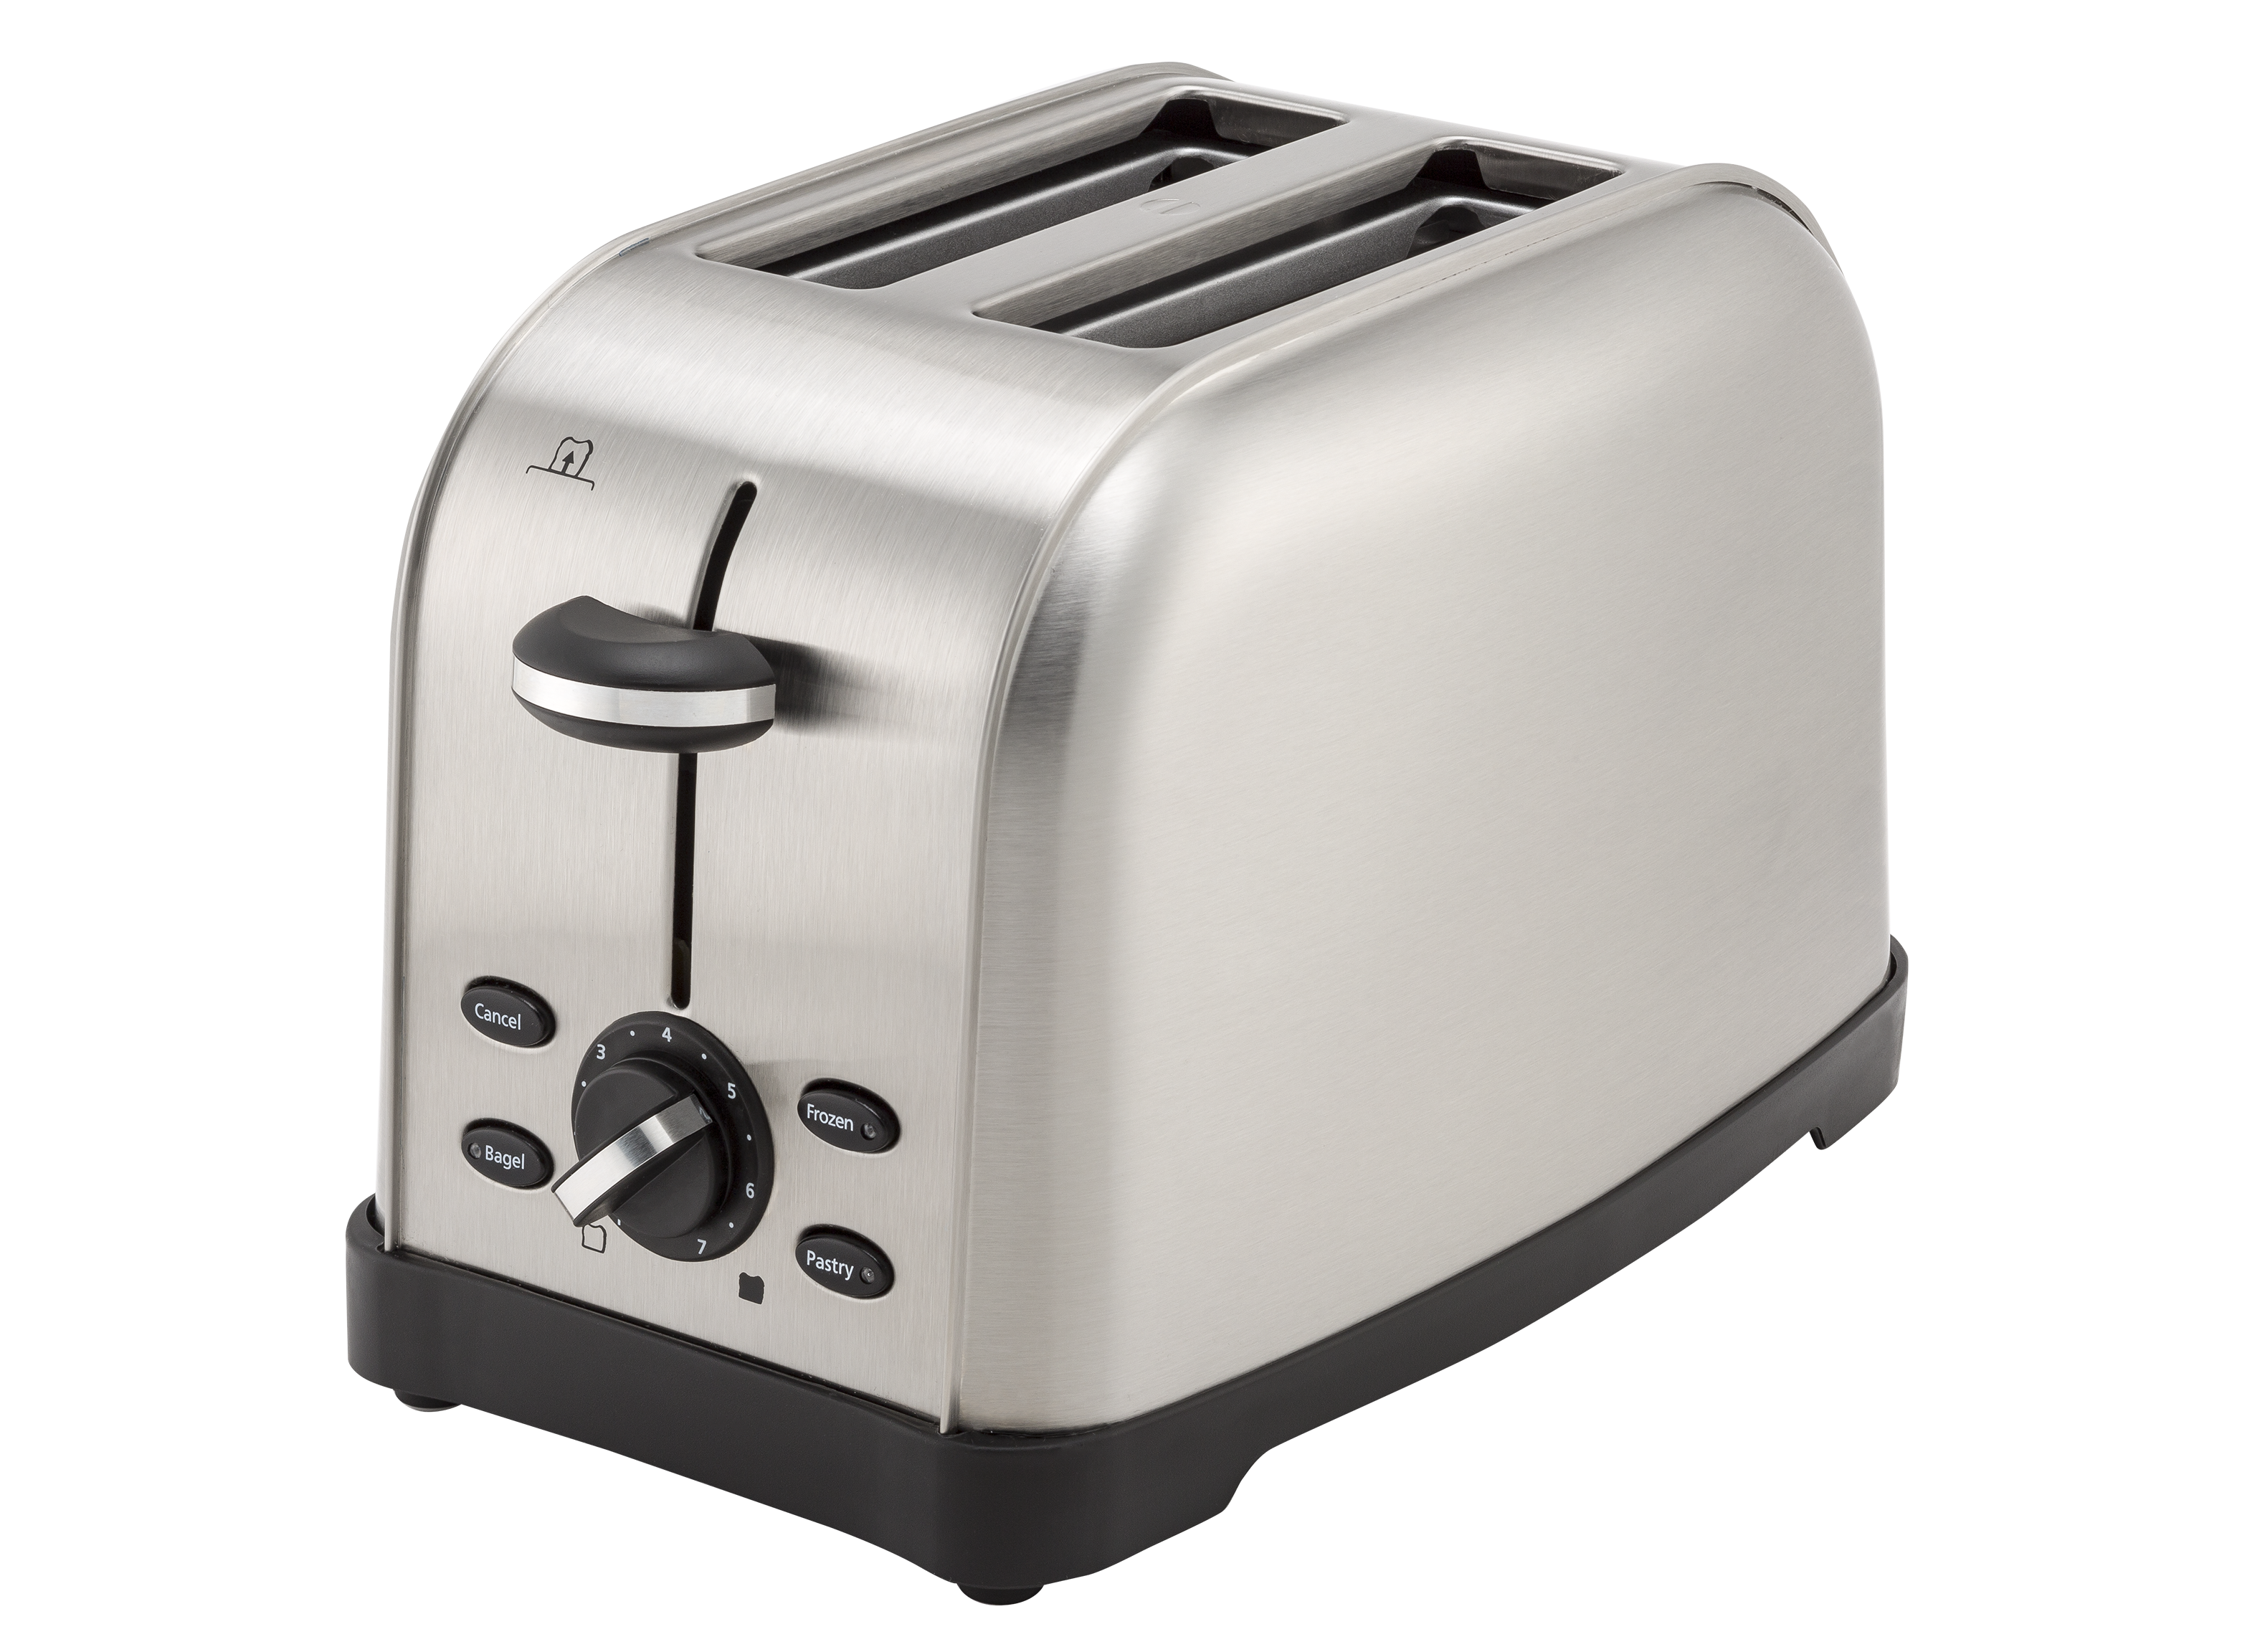 https://crdms.images.consumerreports.org/prod/products/cr/models/387691-toasters-oster-2slicestainlesssteeltssttrwf2s001.png